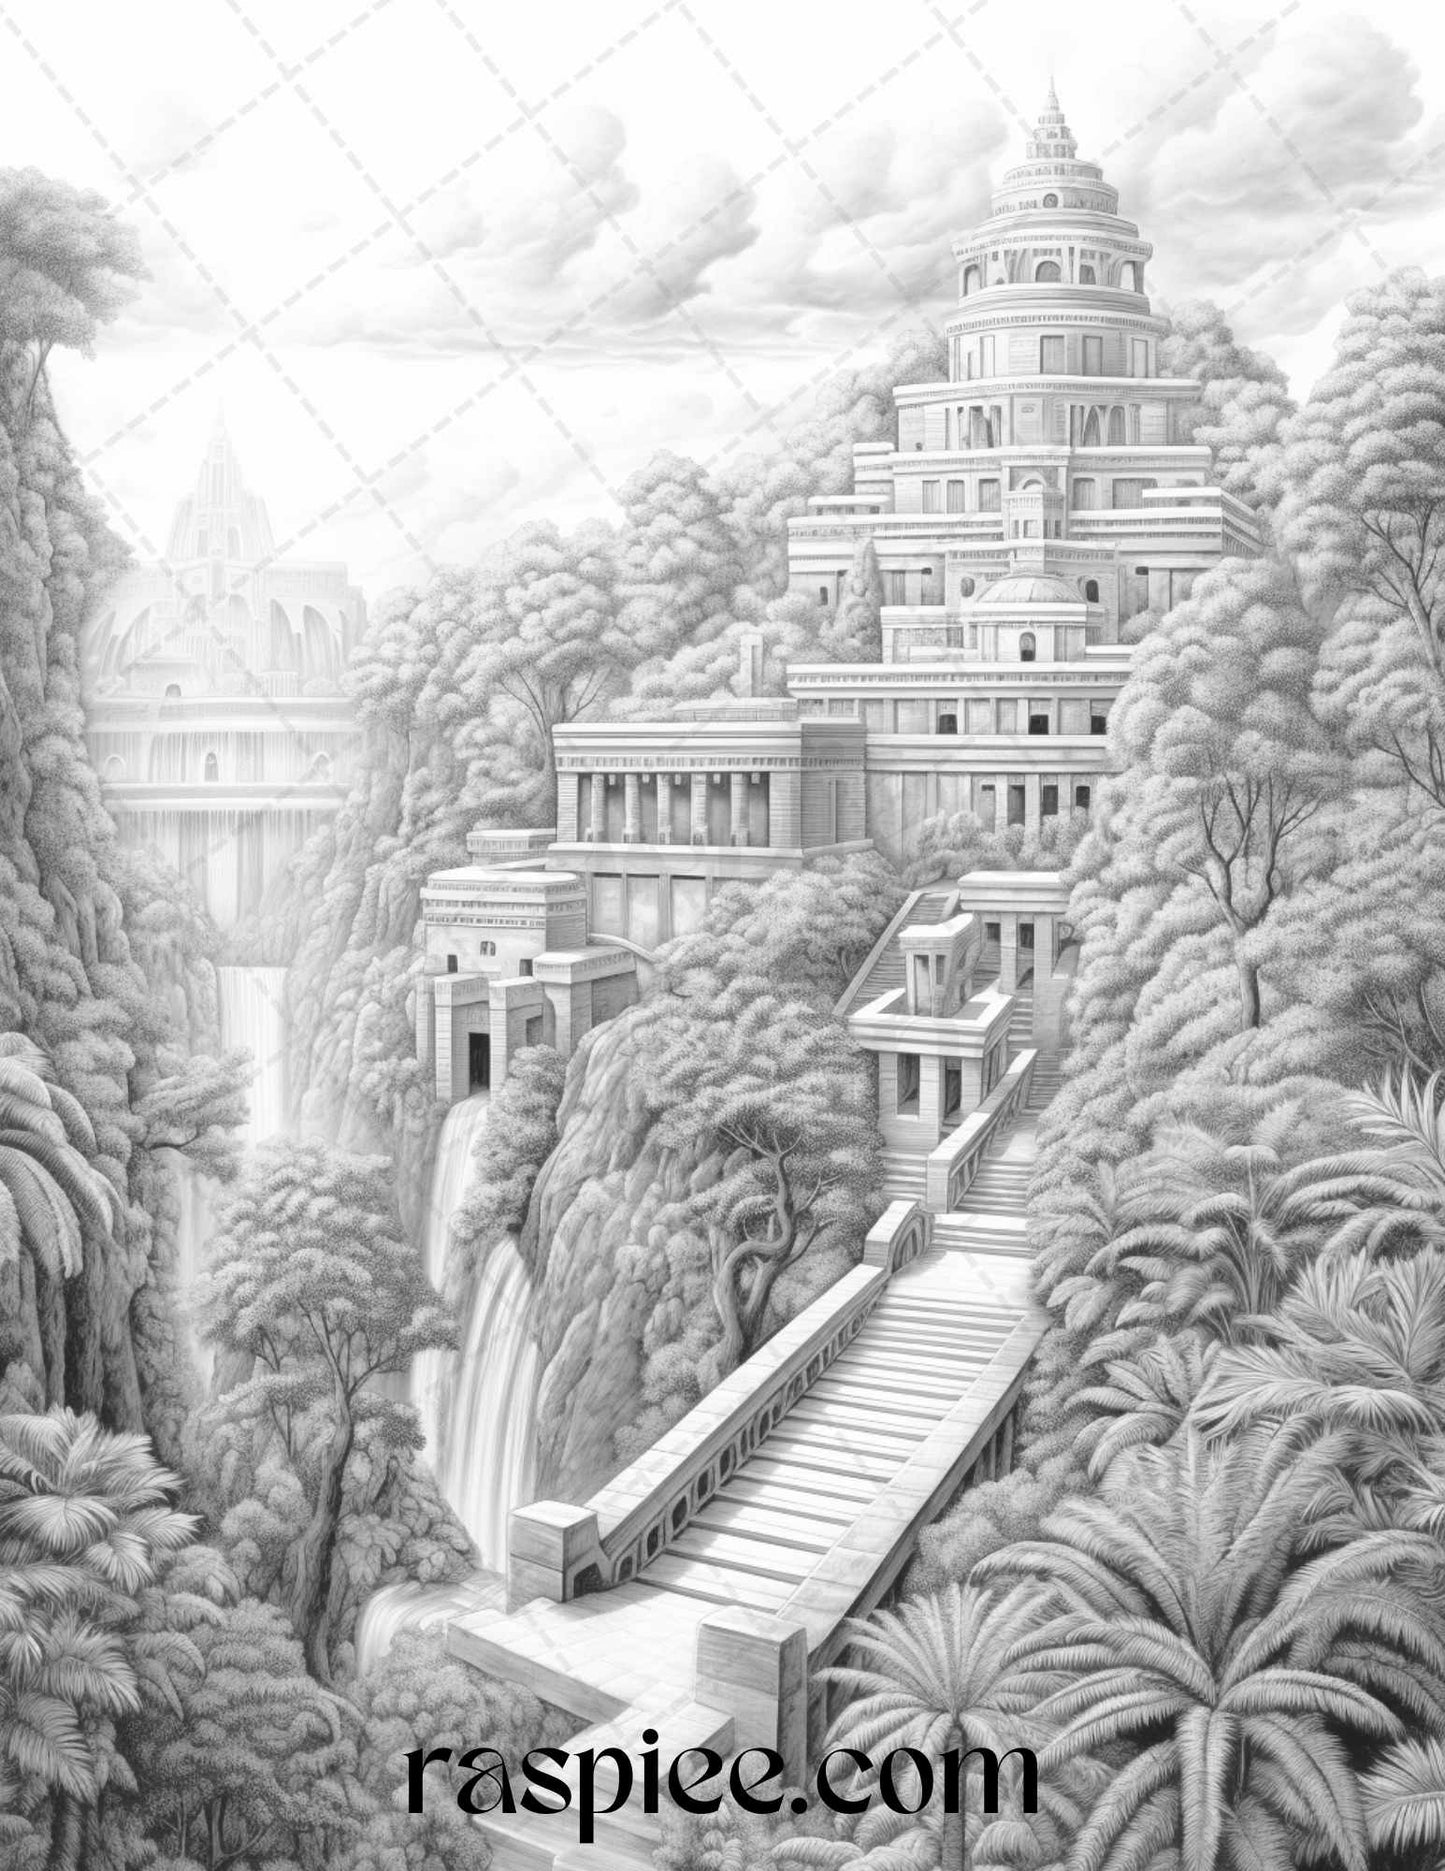 Hanging Gardens of Babylon Grayscale Coloring Pages Printable, PDF File Instant Download - Raspiee Coloring